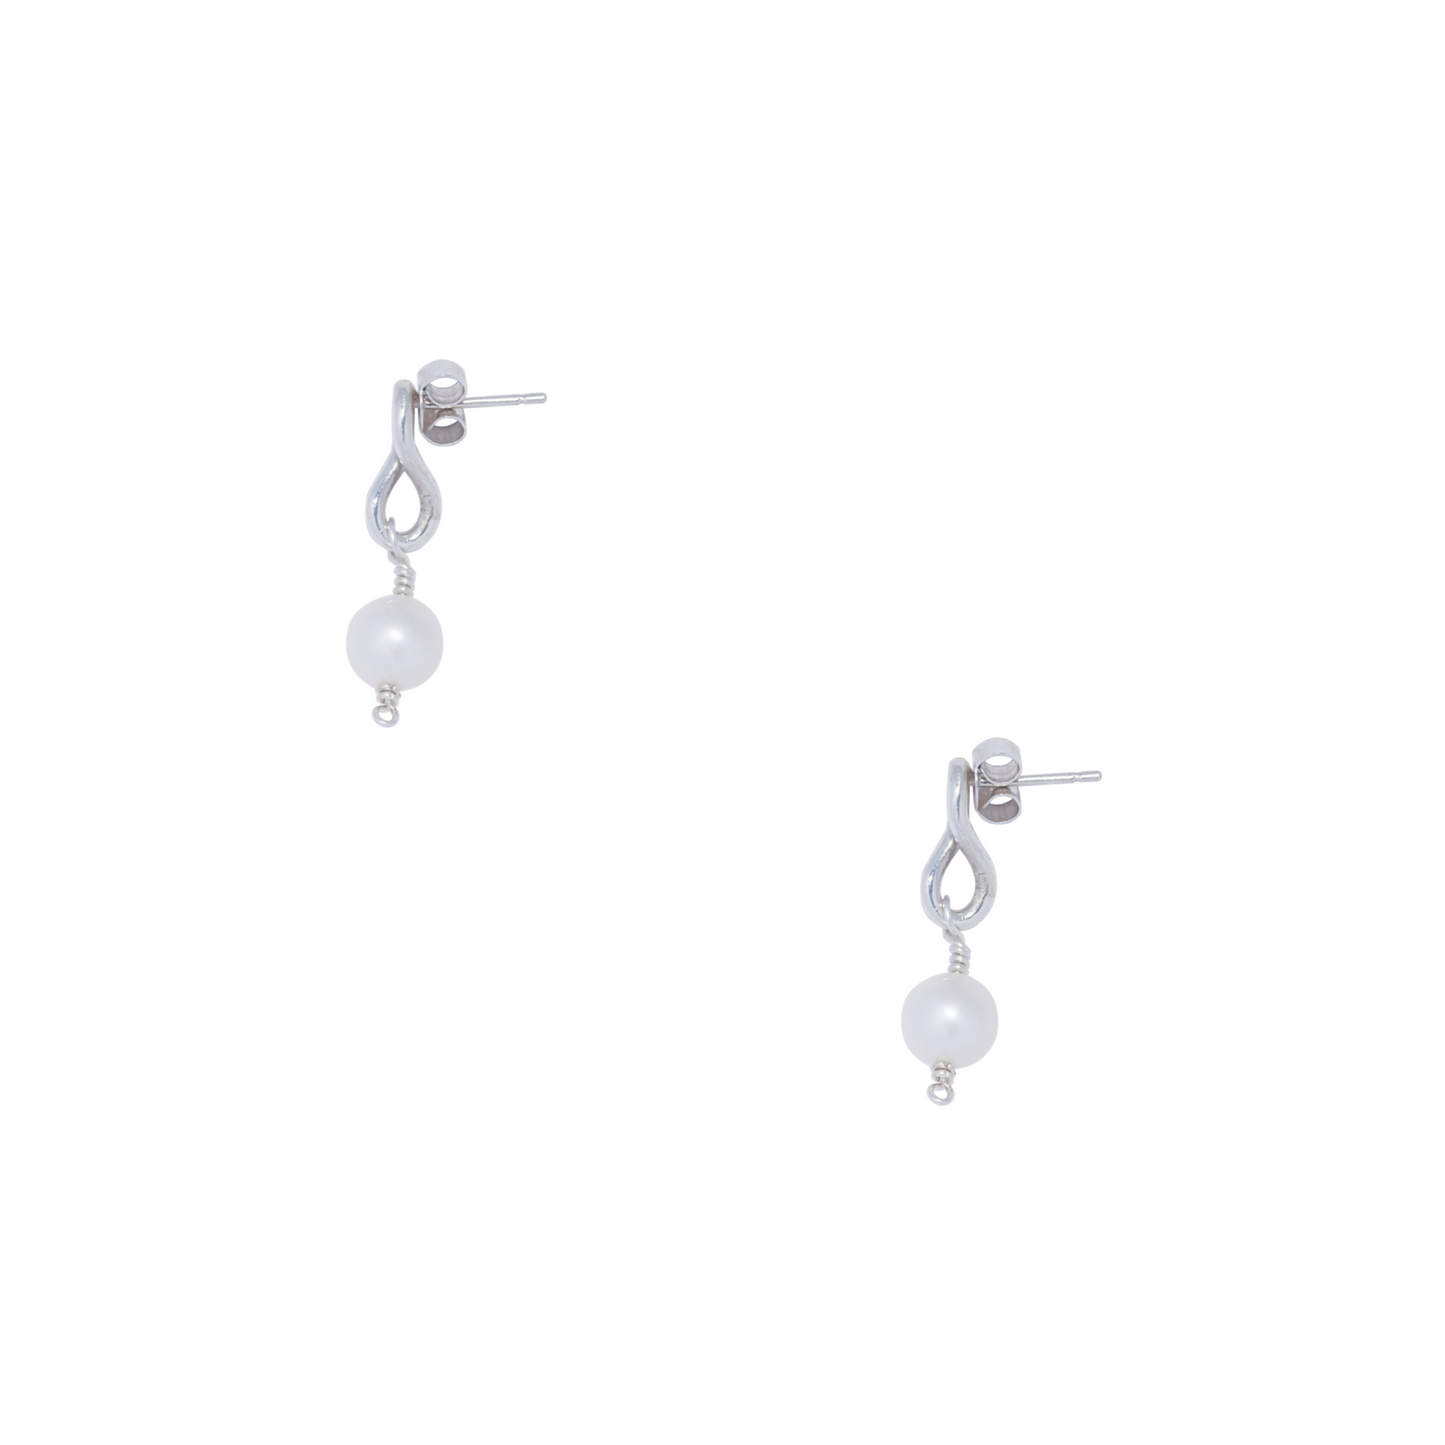 Tartarus Pearl Recycled Sterling Silver Earrings- embracing imperfection, echoing ancient stories - £55 - Hanifah Jewellery